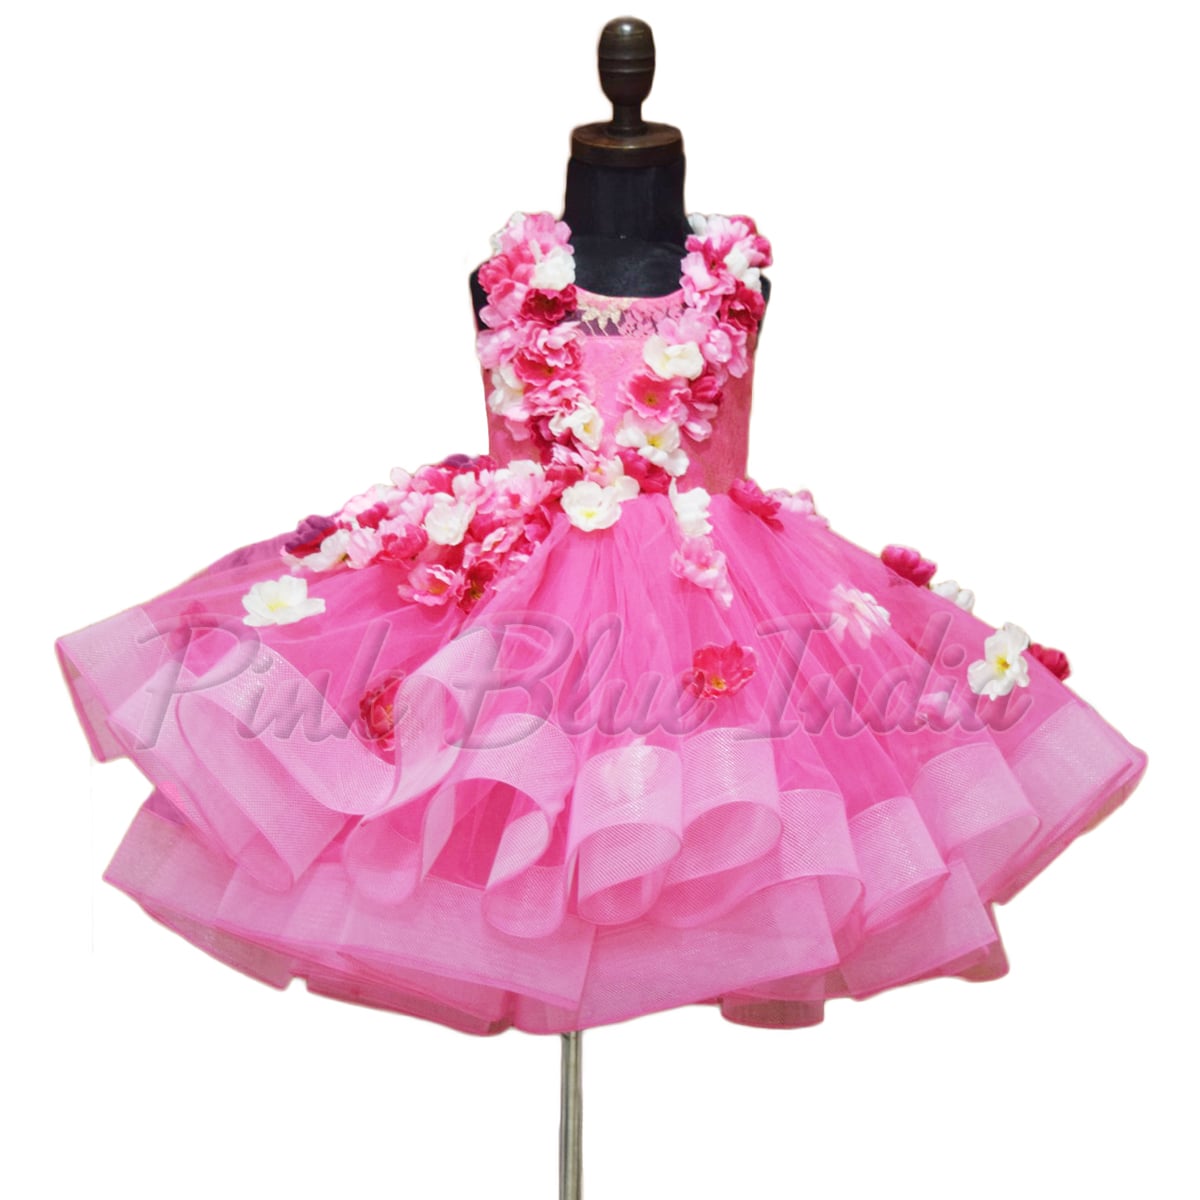 Pink Dress with Big Bow on Back, Buy Baby Girl Bow Dress